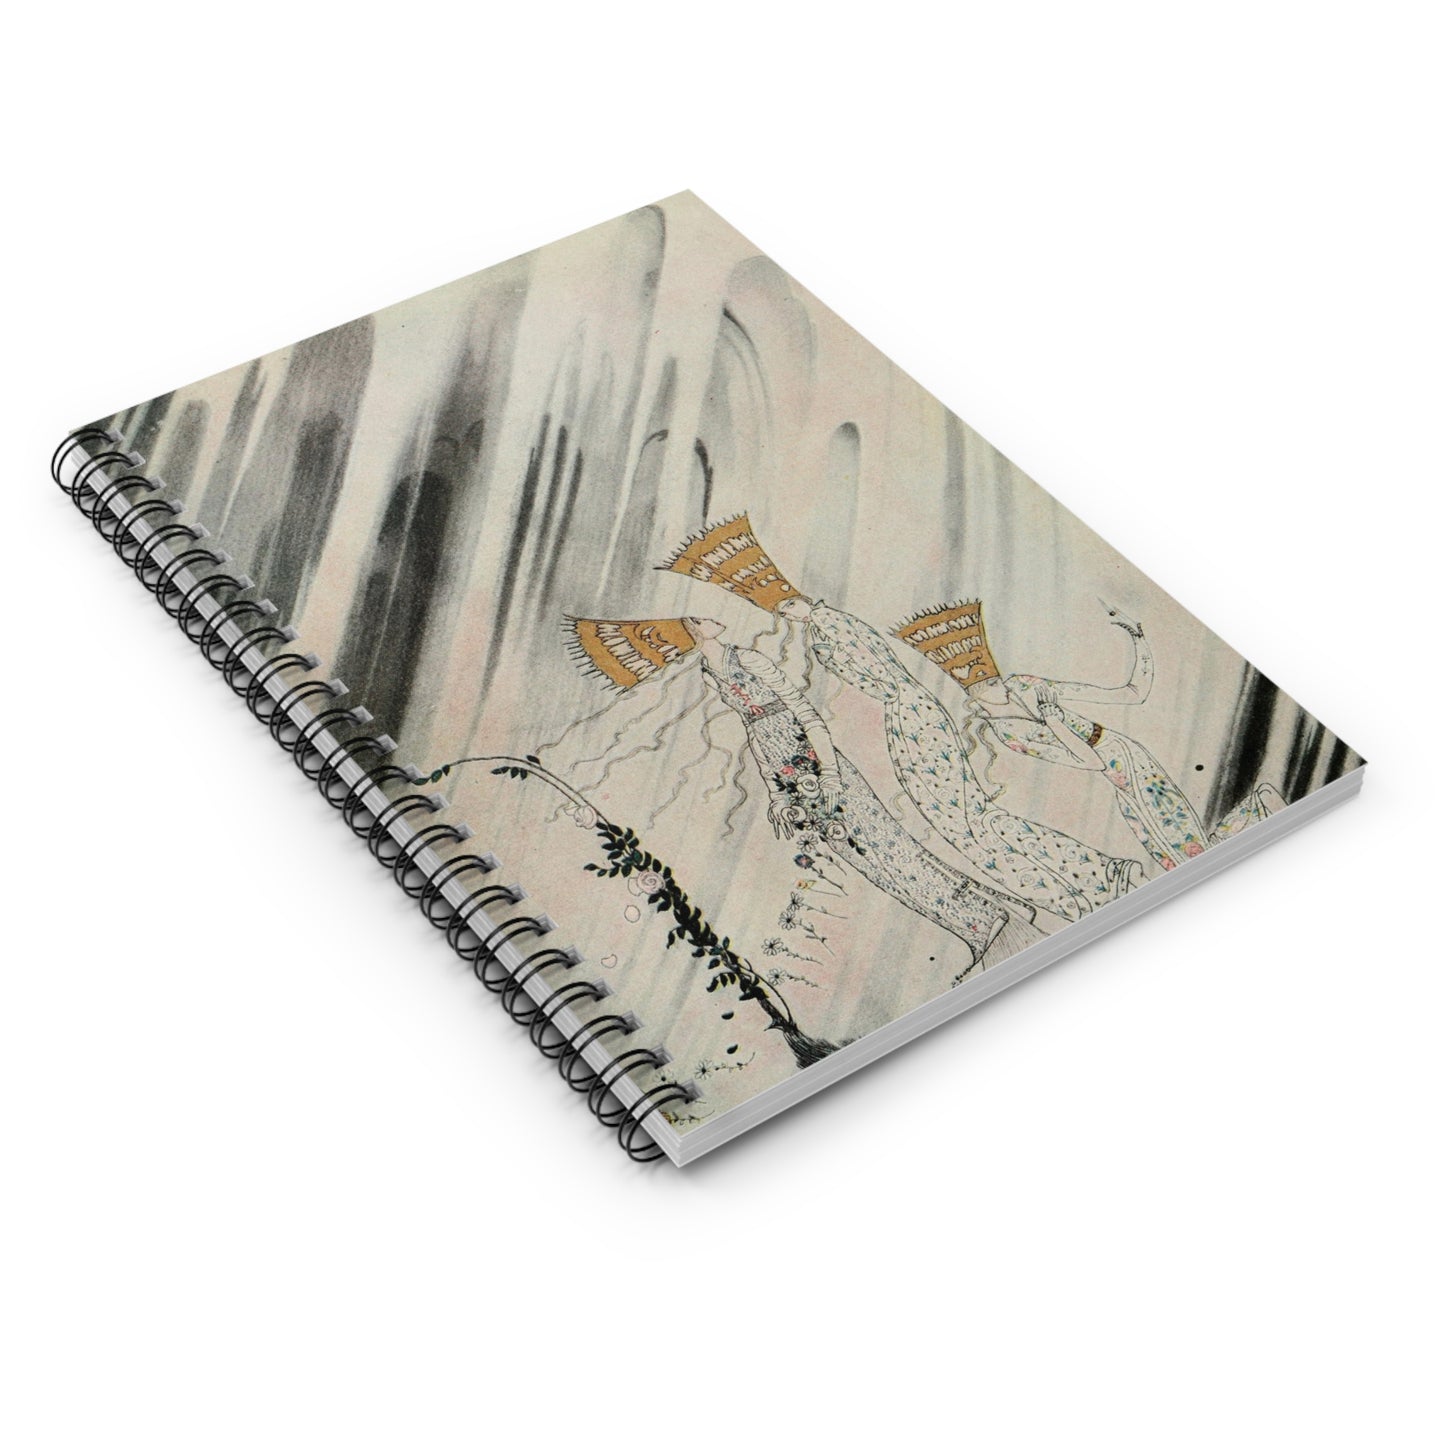 KAY RASMUS NIELSEN - EAST OF THE SUN AND WEST OF THE MOON  (pl 22) - SPIRAL ART NOTEBOOK